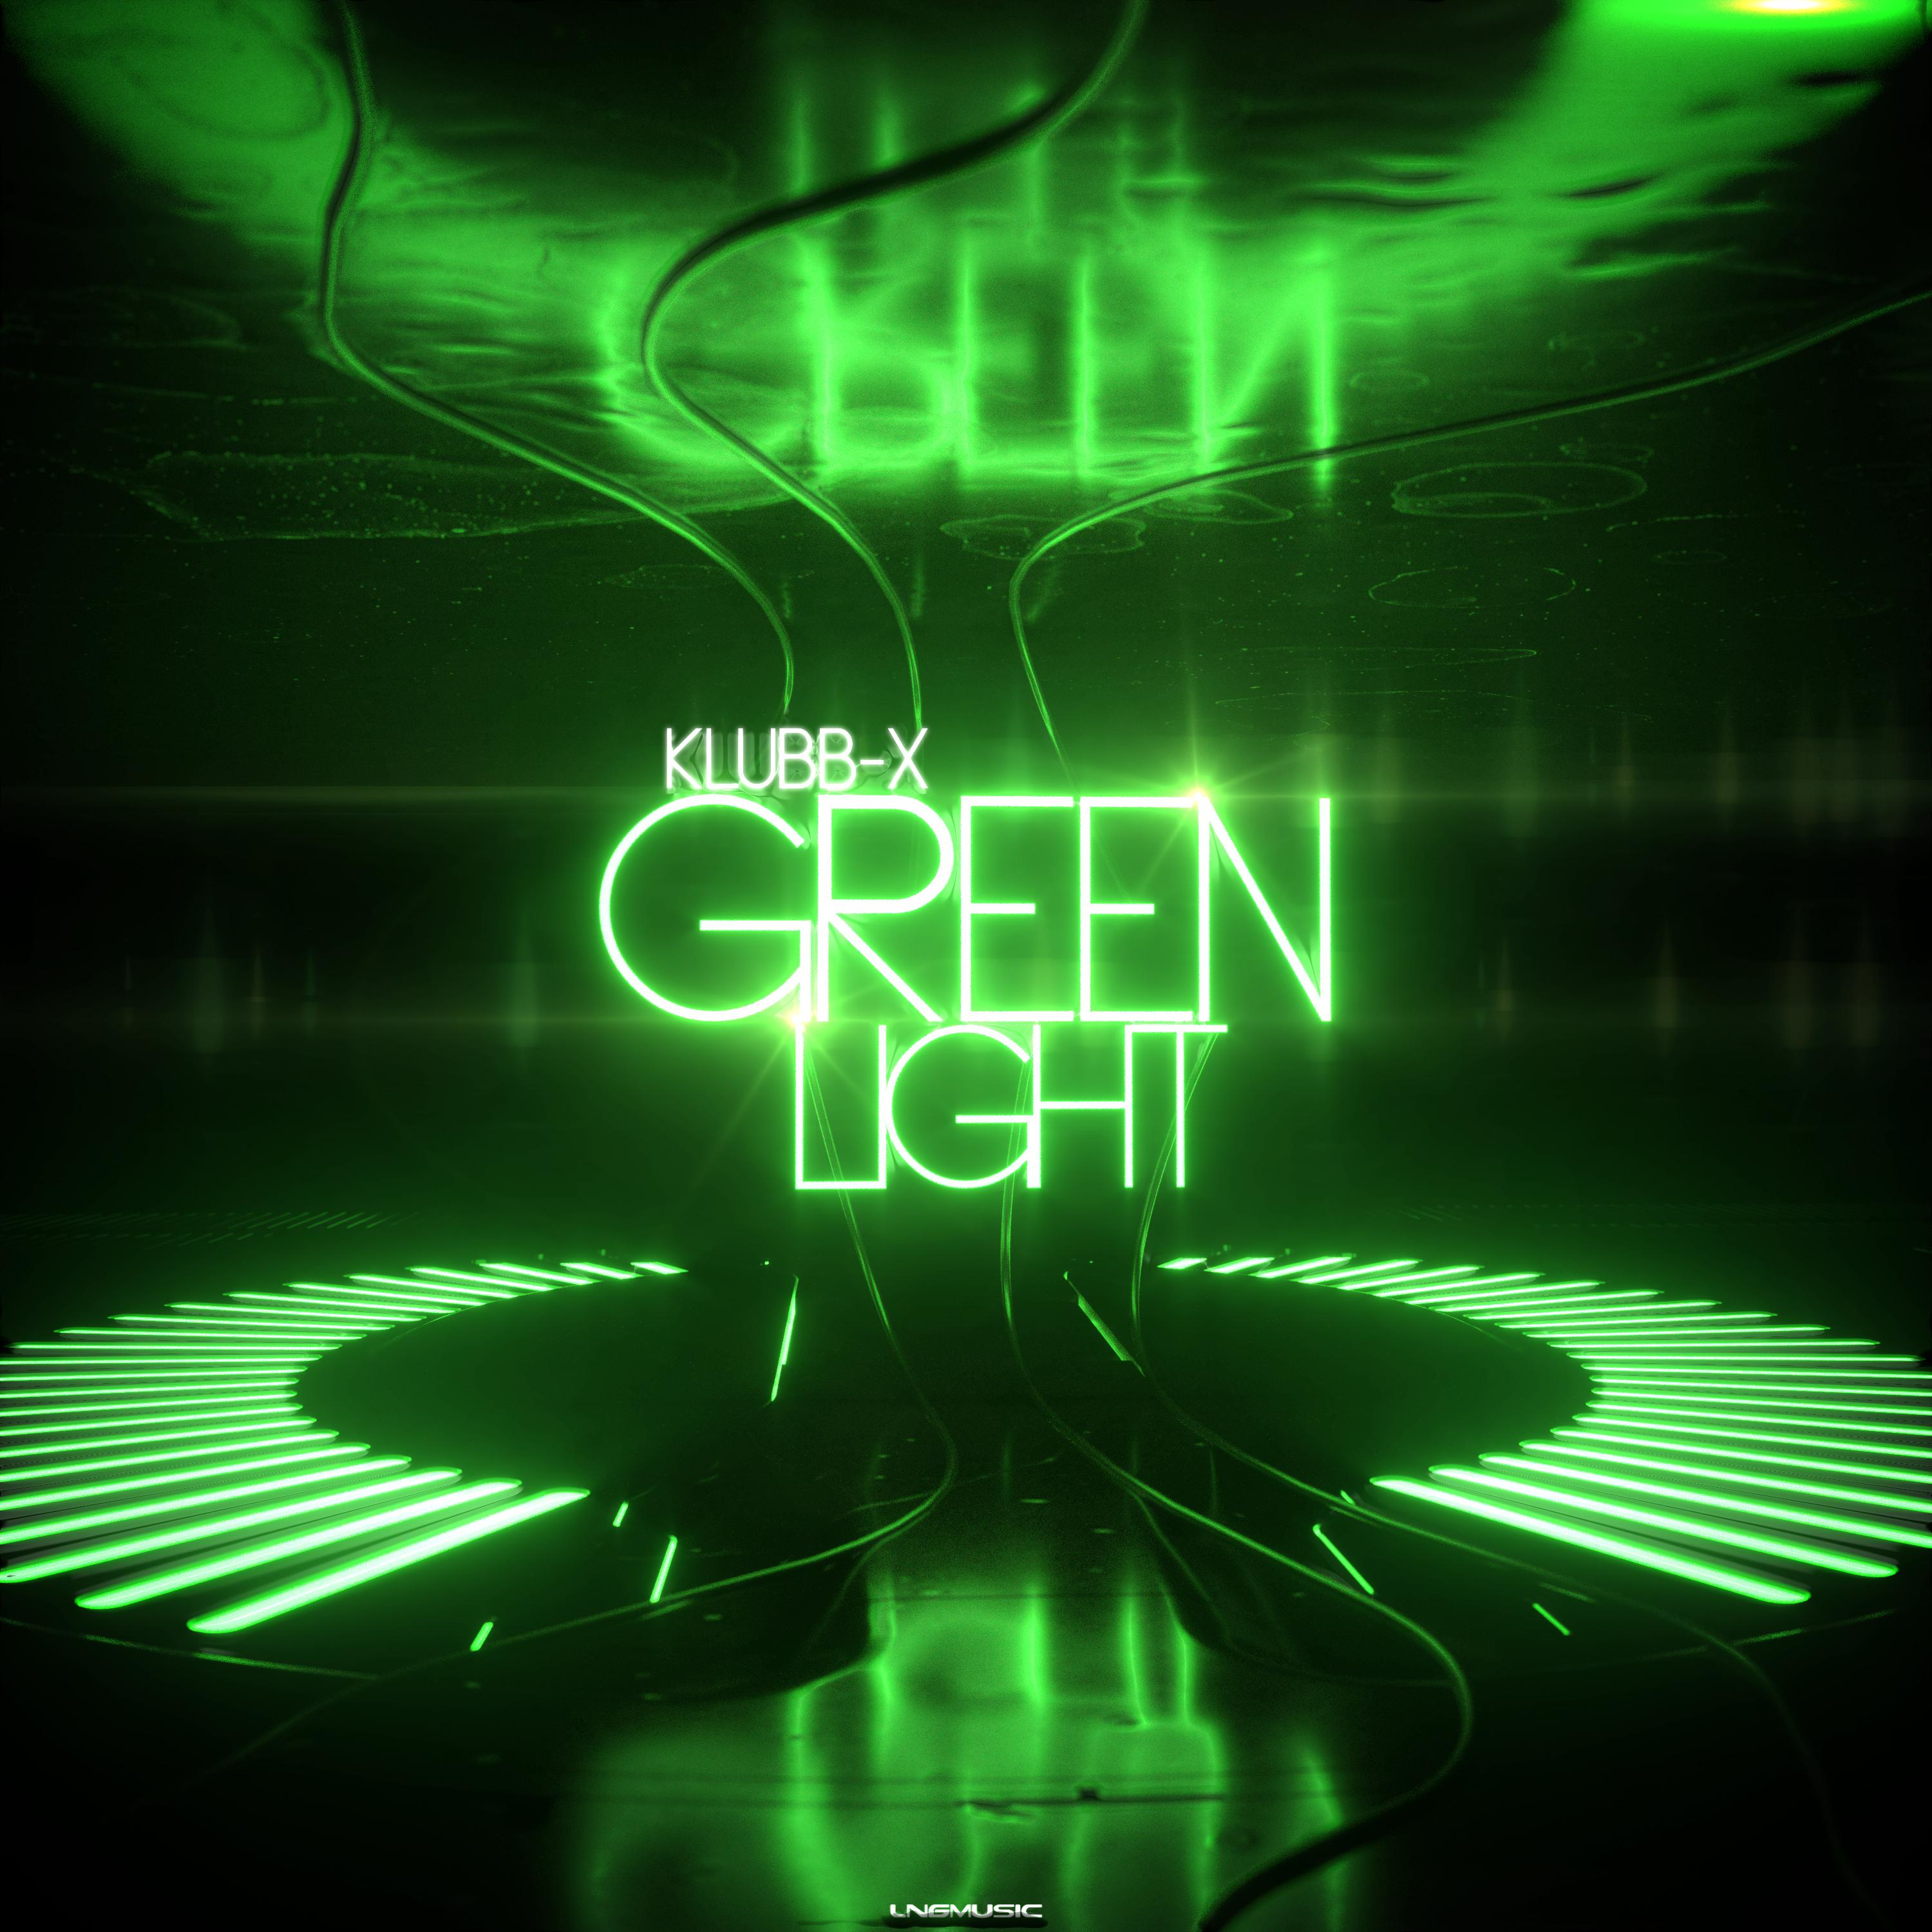 Green Light (Acoustic Chillout Version)